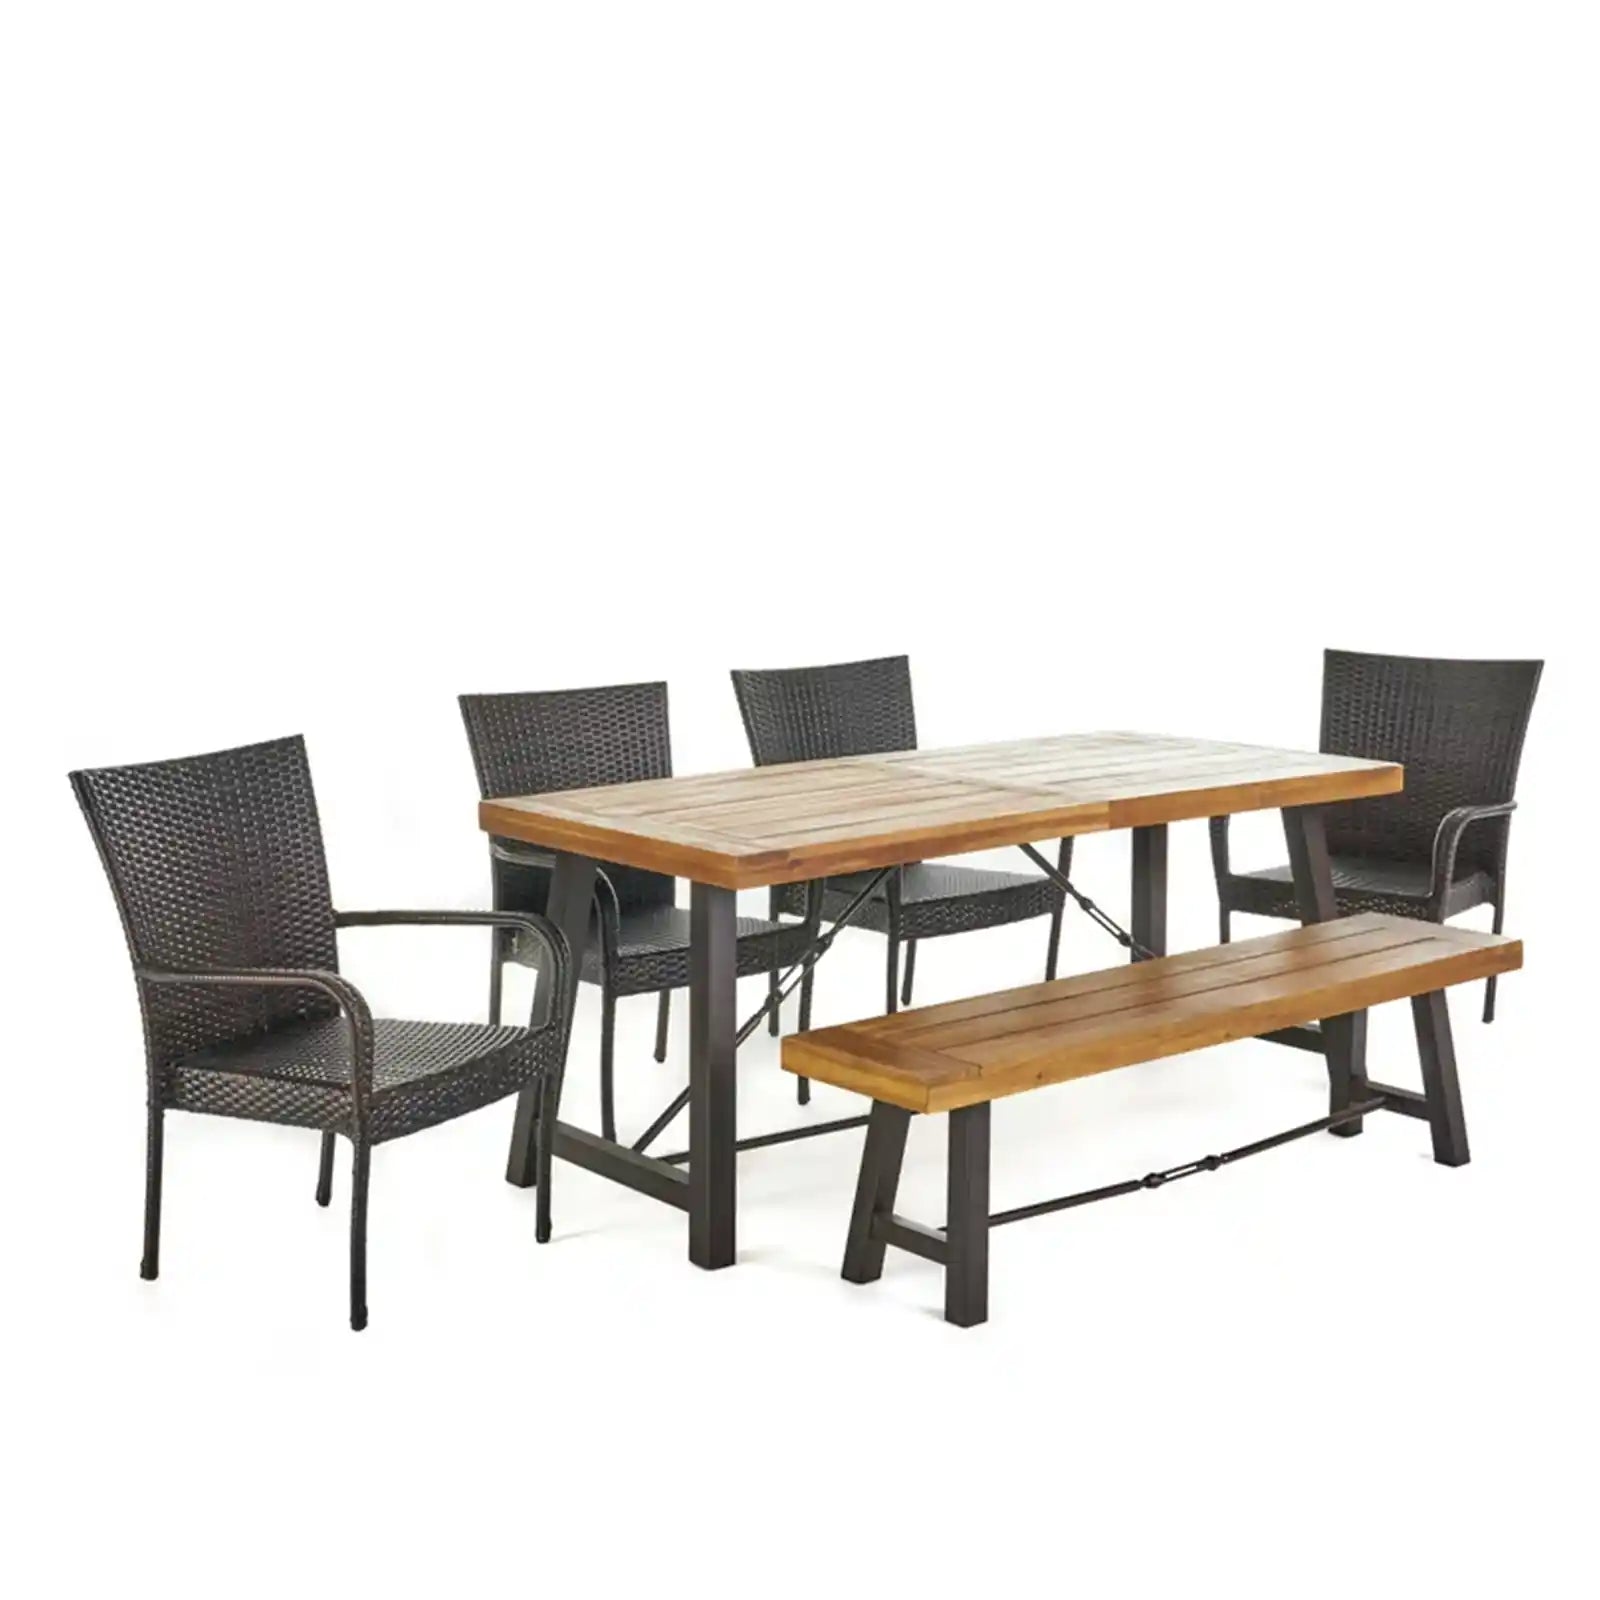 Outdoor 6-Piece Acacia Wood Dining Set with Wicker Stacking Chairs, Teak Finish, Multi-Brown